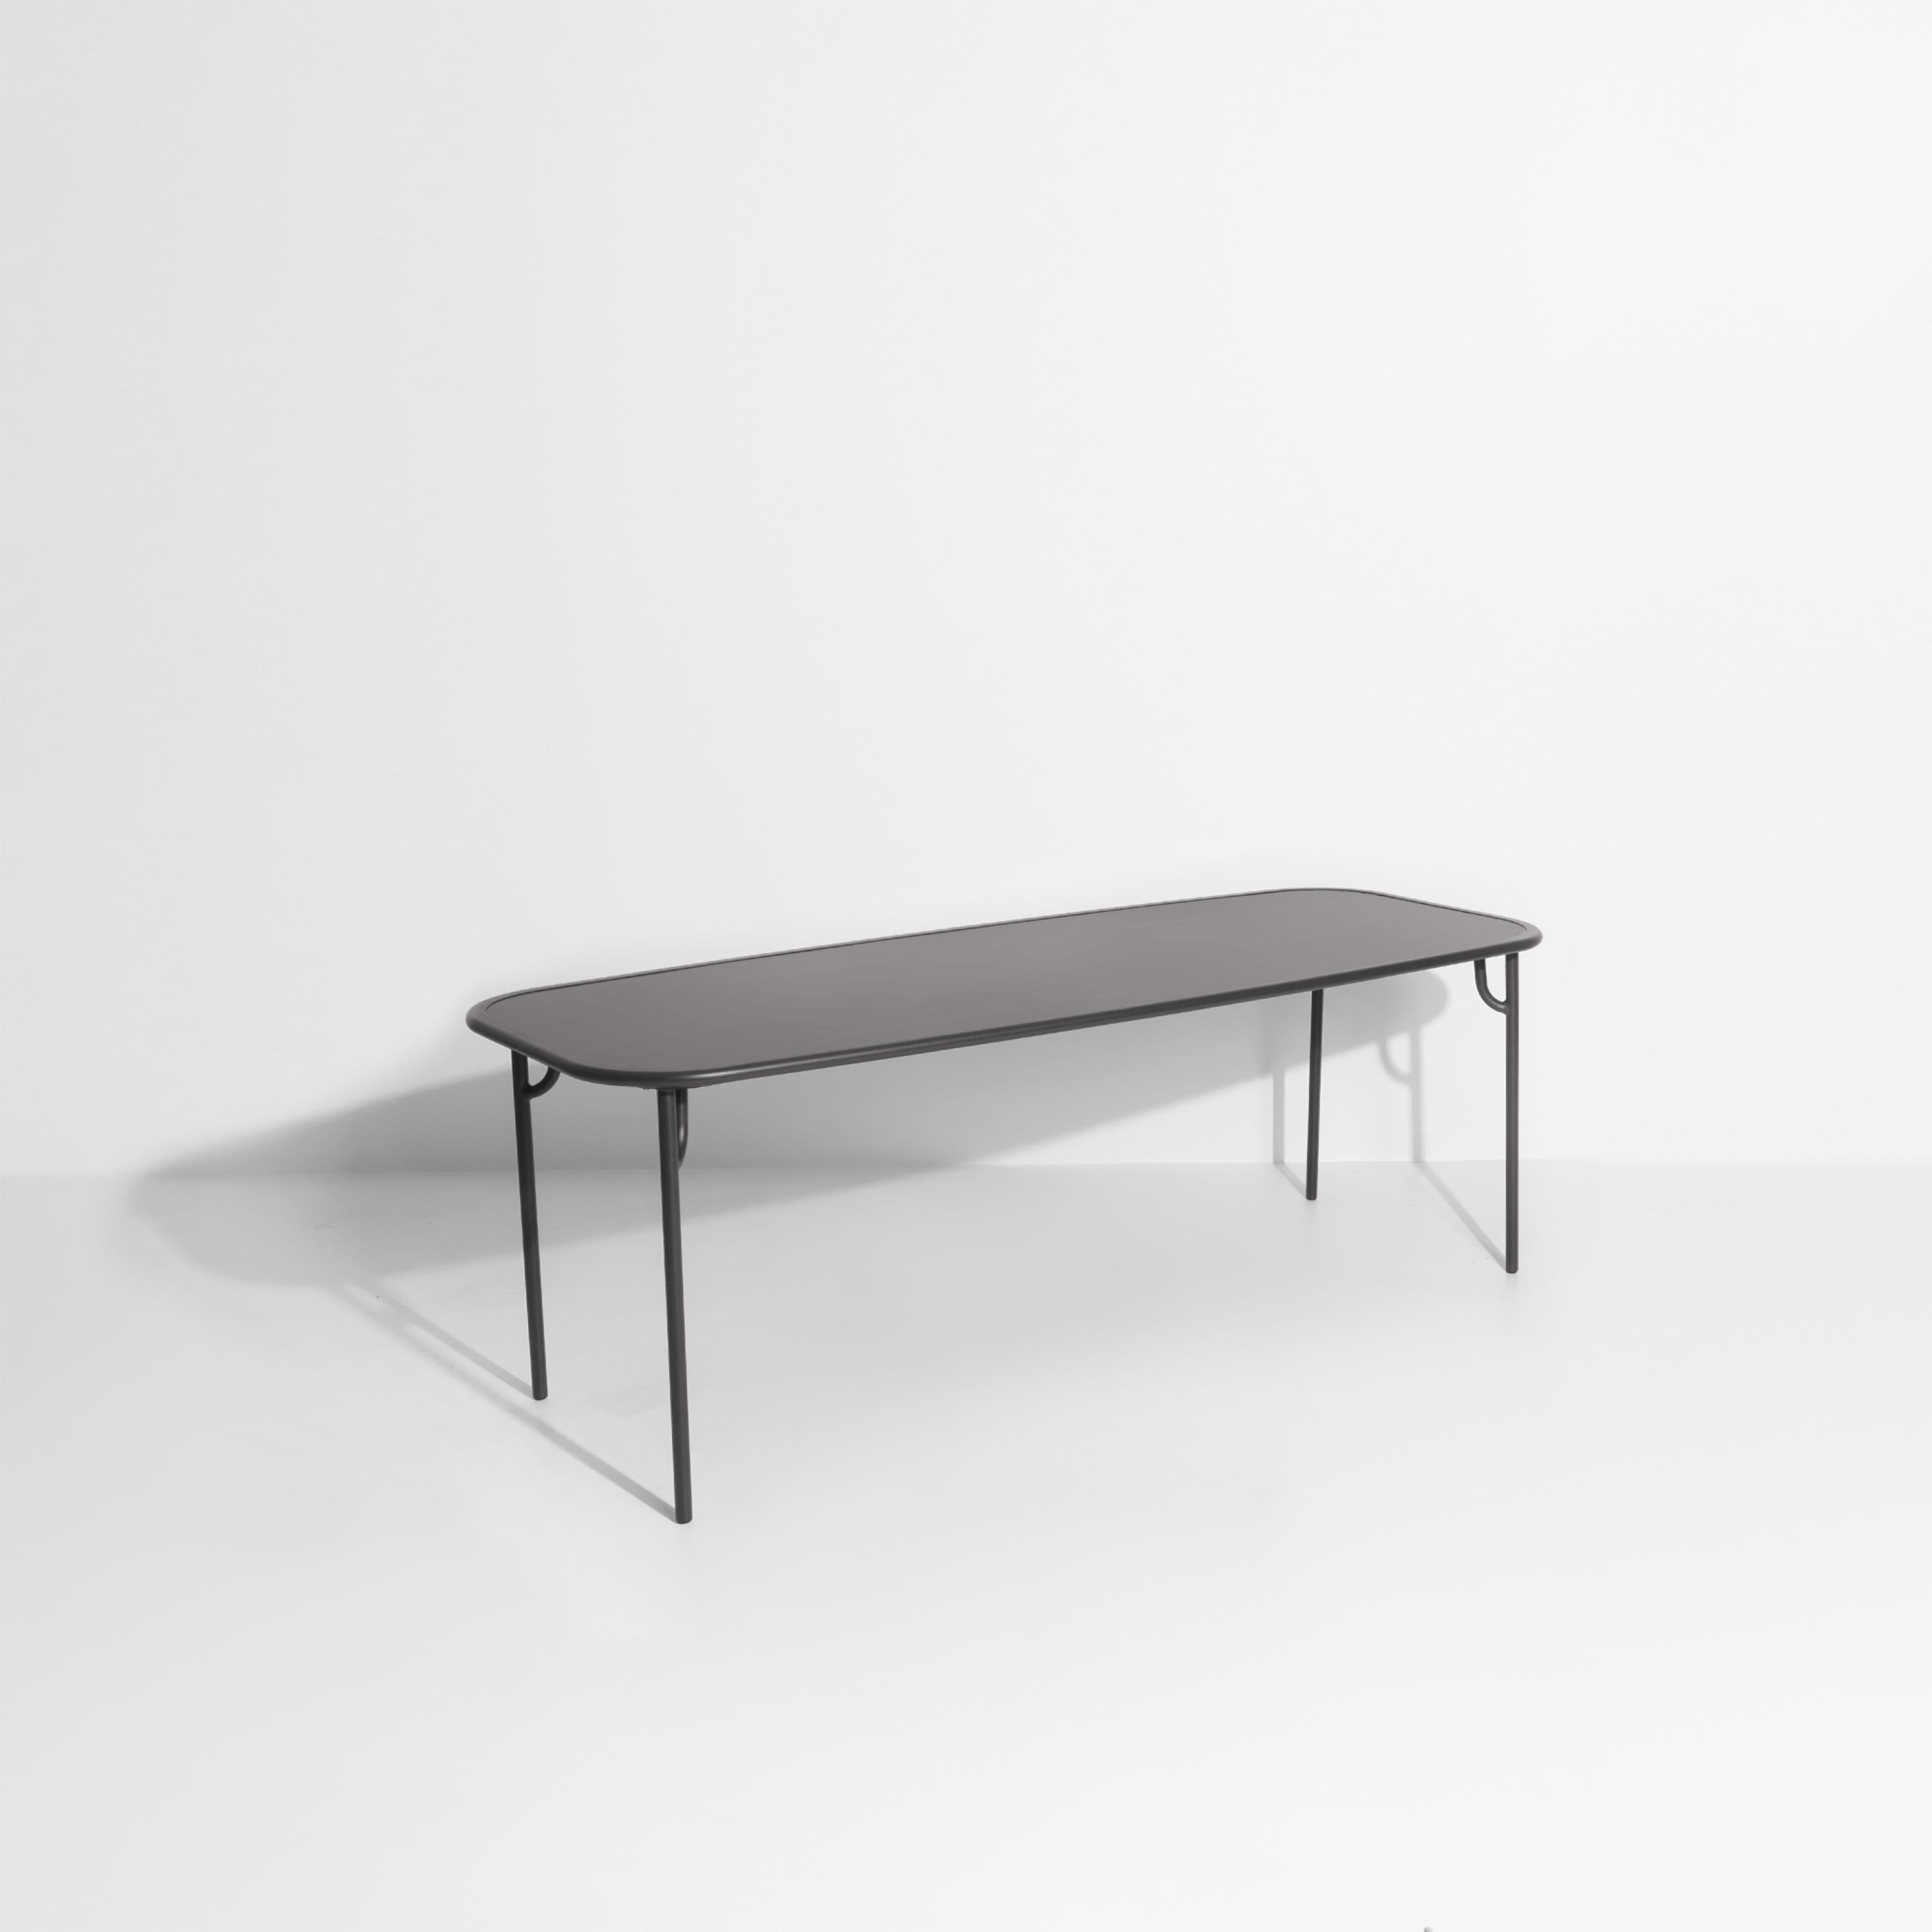 Petite Friture Week-End Large Plain Rectangular Dining Table in Anthracite Aluminium by Studio BrichetZiegler, 2017

The week-end collection is a full range of outdoor furniture, in aluminium grained epoxy paint, matt finish, that includes 18